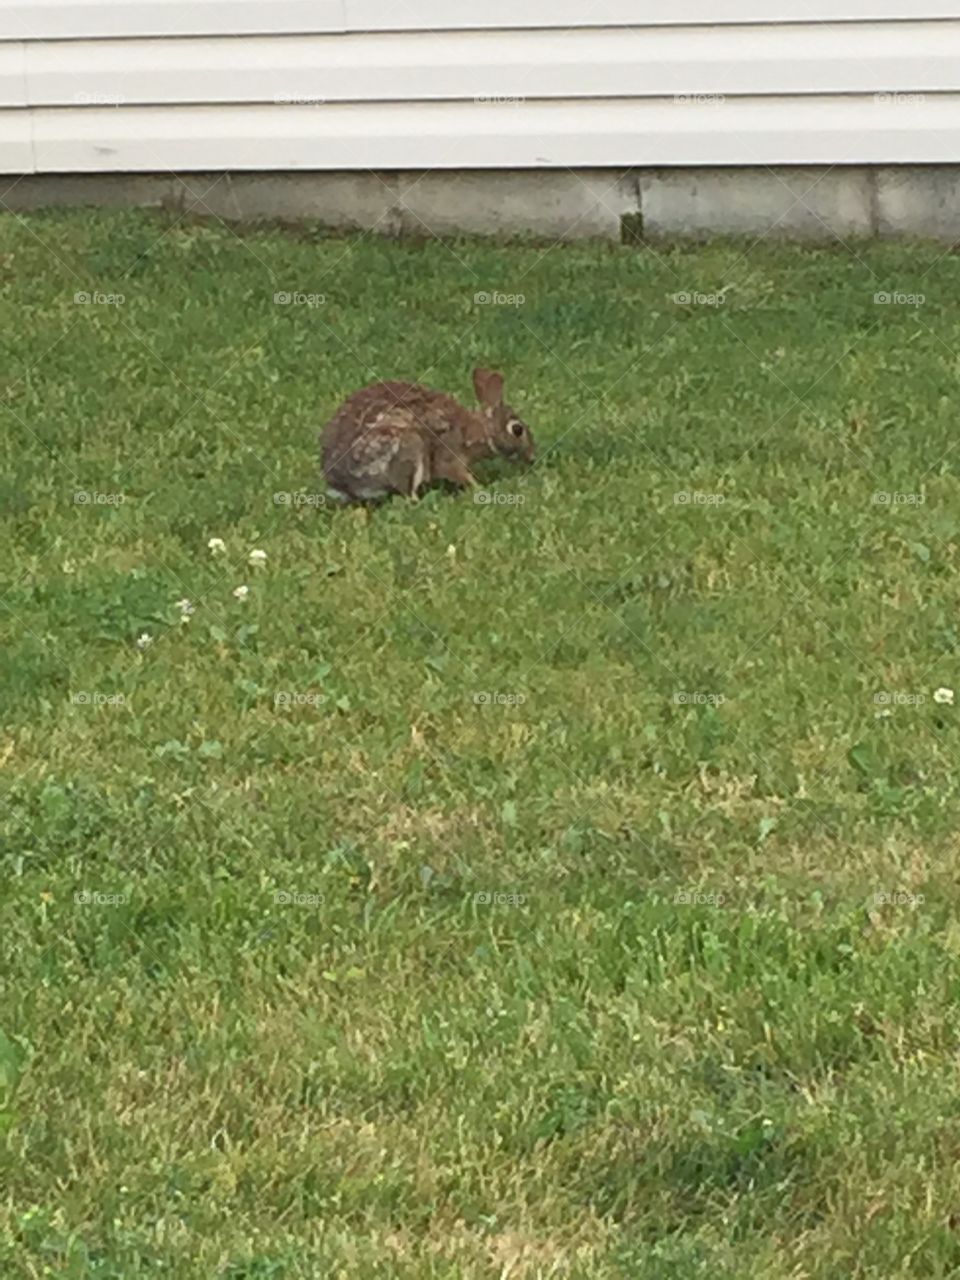 Bunny eating . A bunny eating some grass.